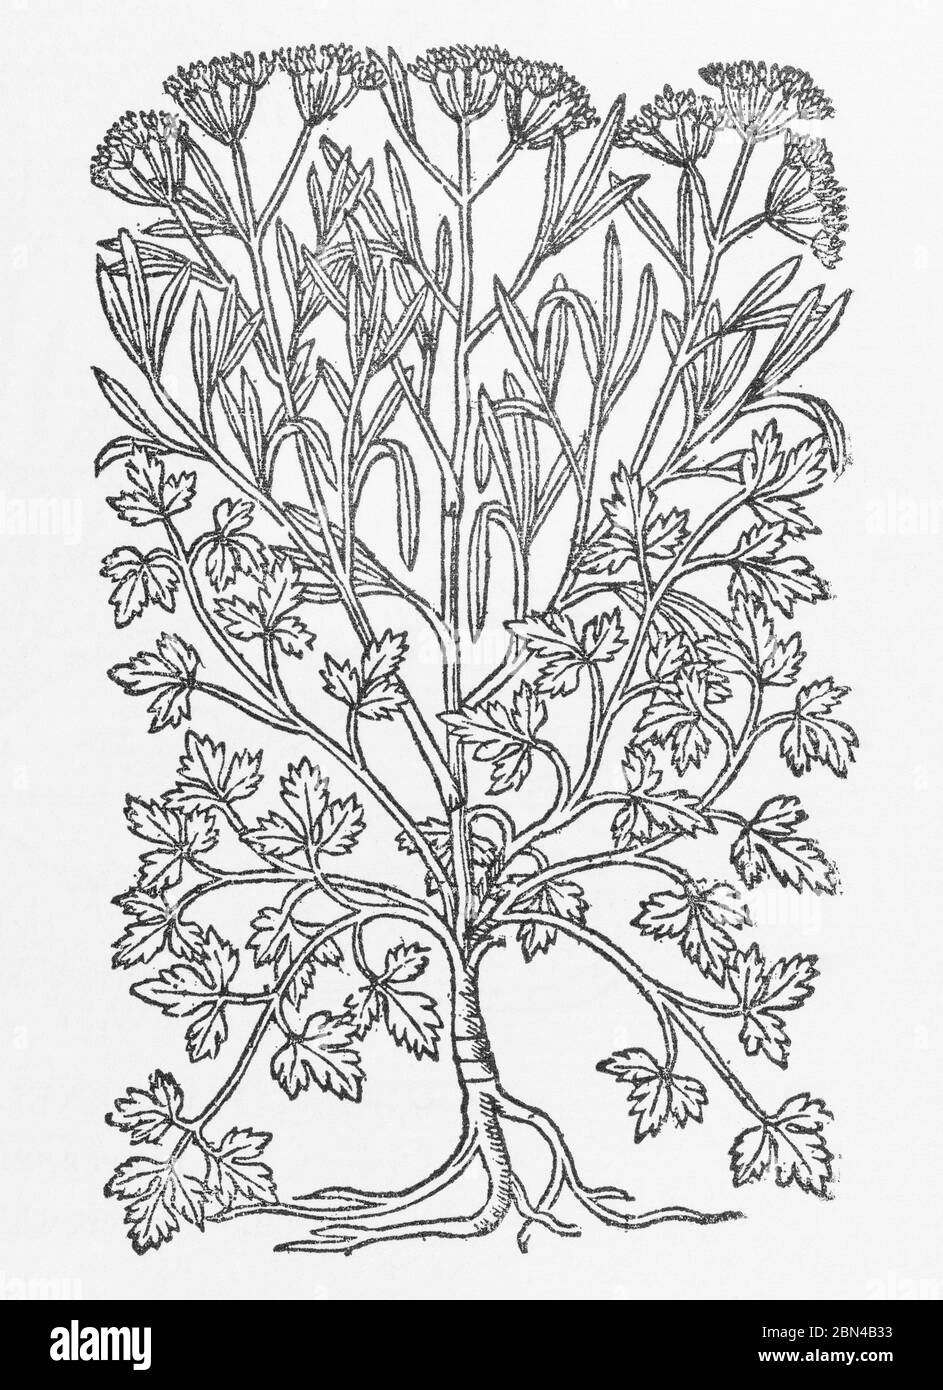 Garden Parsley / Carum petroselinum plant woodcut from Gerarde's Herball, History of Plants. He refers to it as Apium hortense. P861 Stock Photo